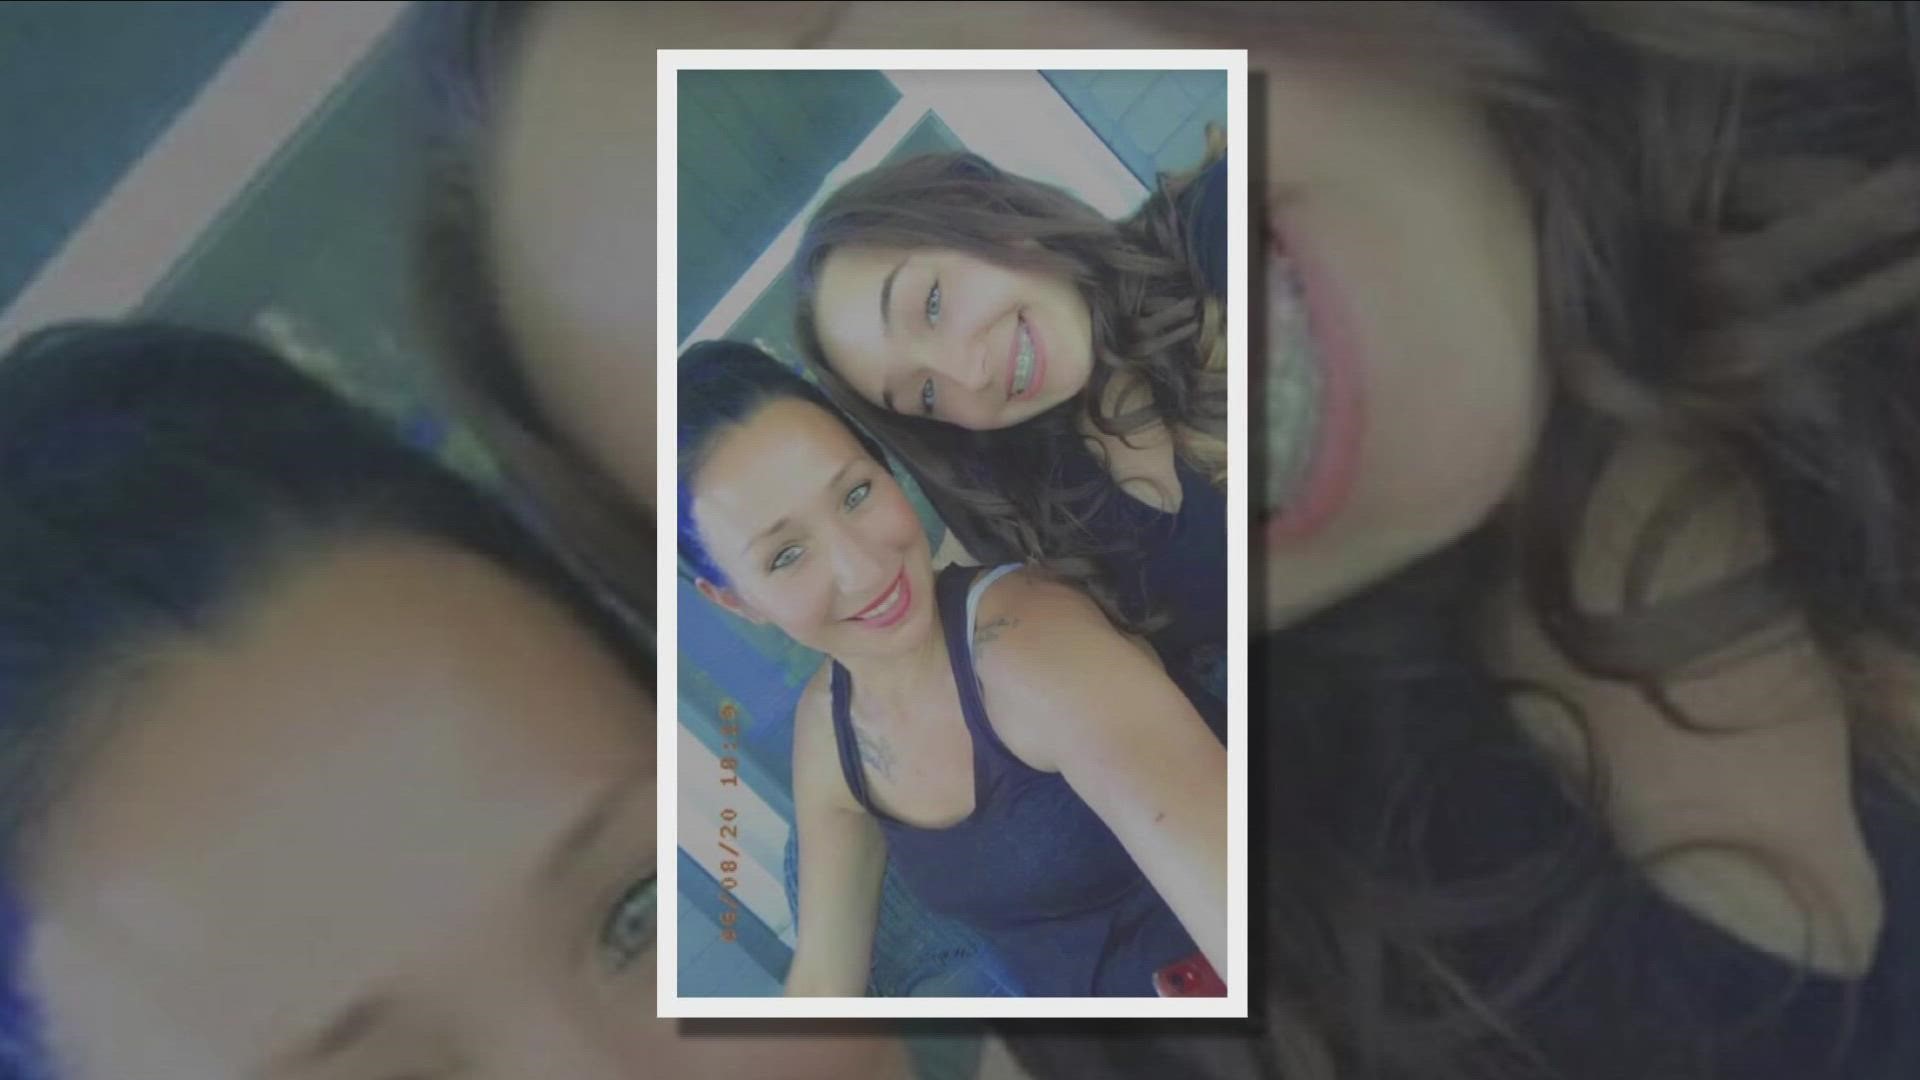 A Niagara Falls family is continuing to mourn the loss of their 16-year-old daughter. Two teenagers are now facing charges in connection to Keiper's death.